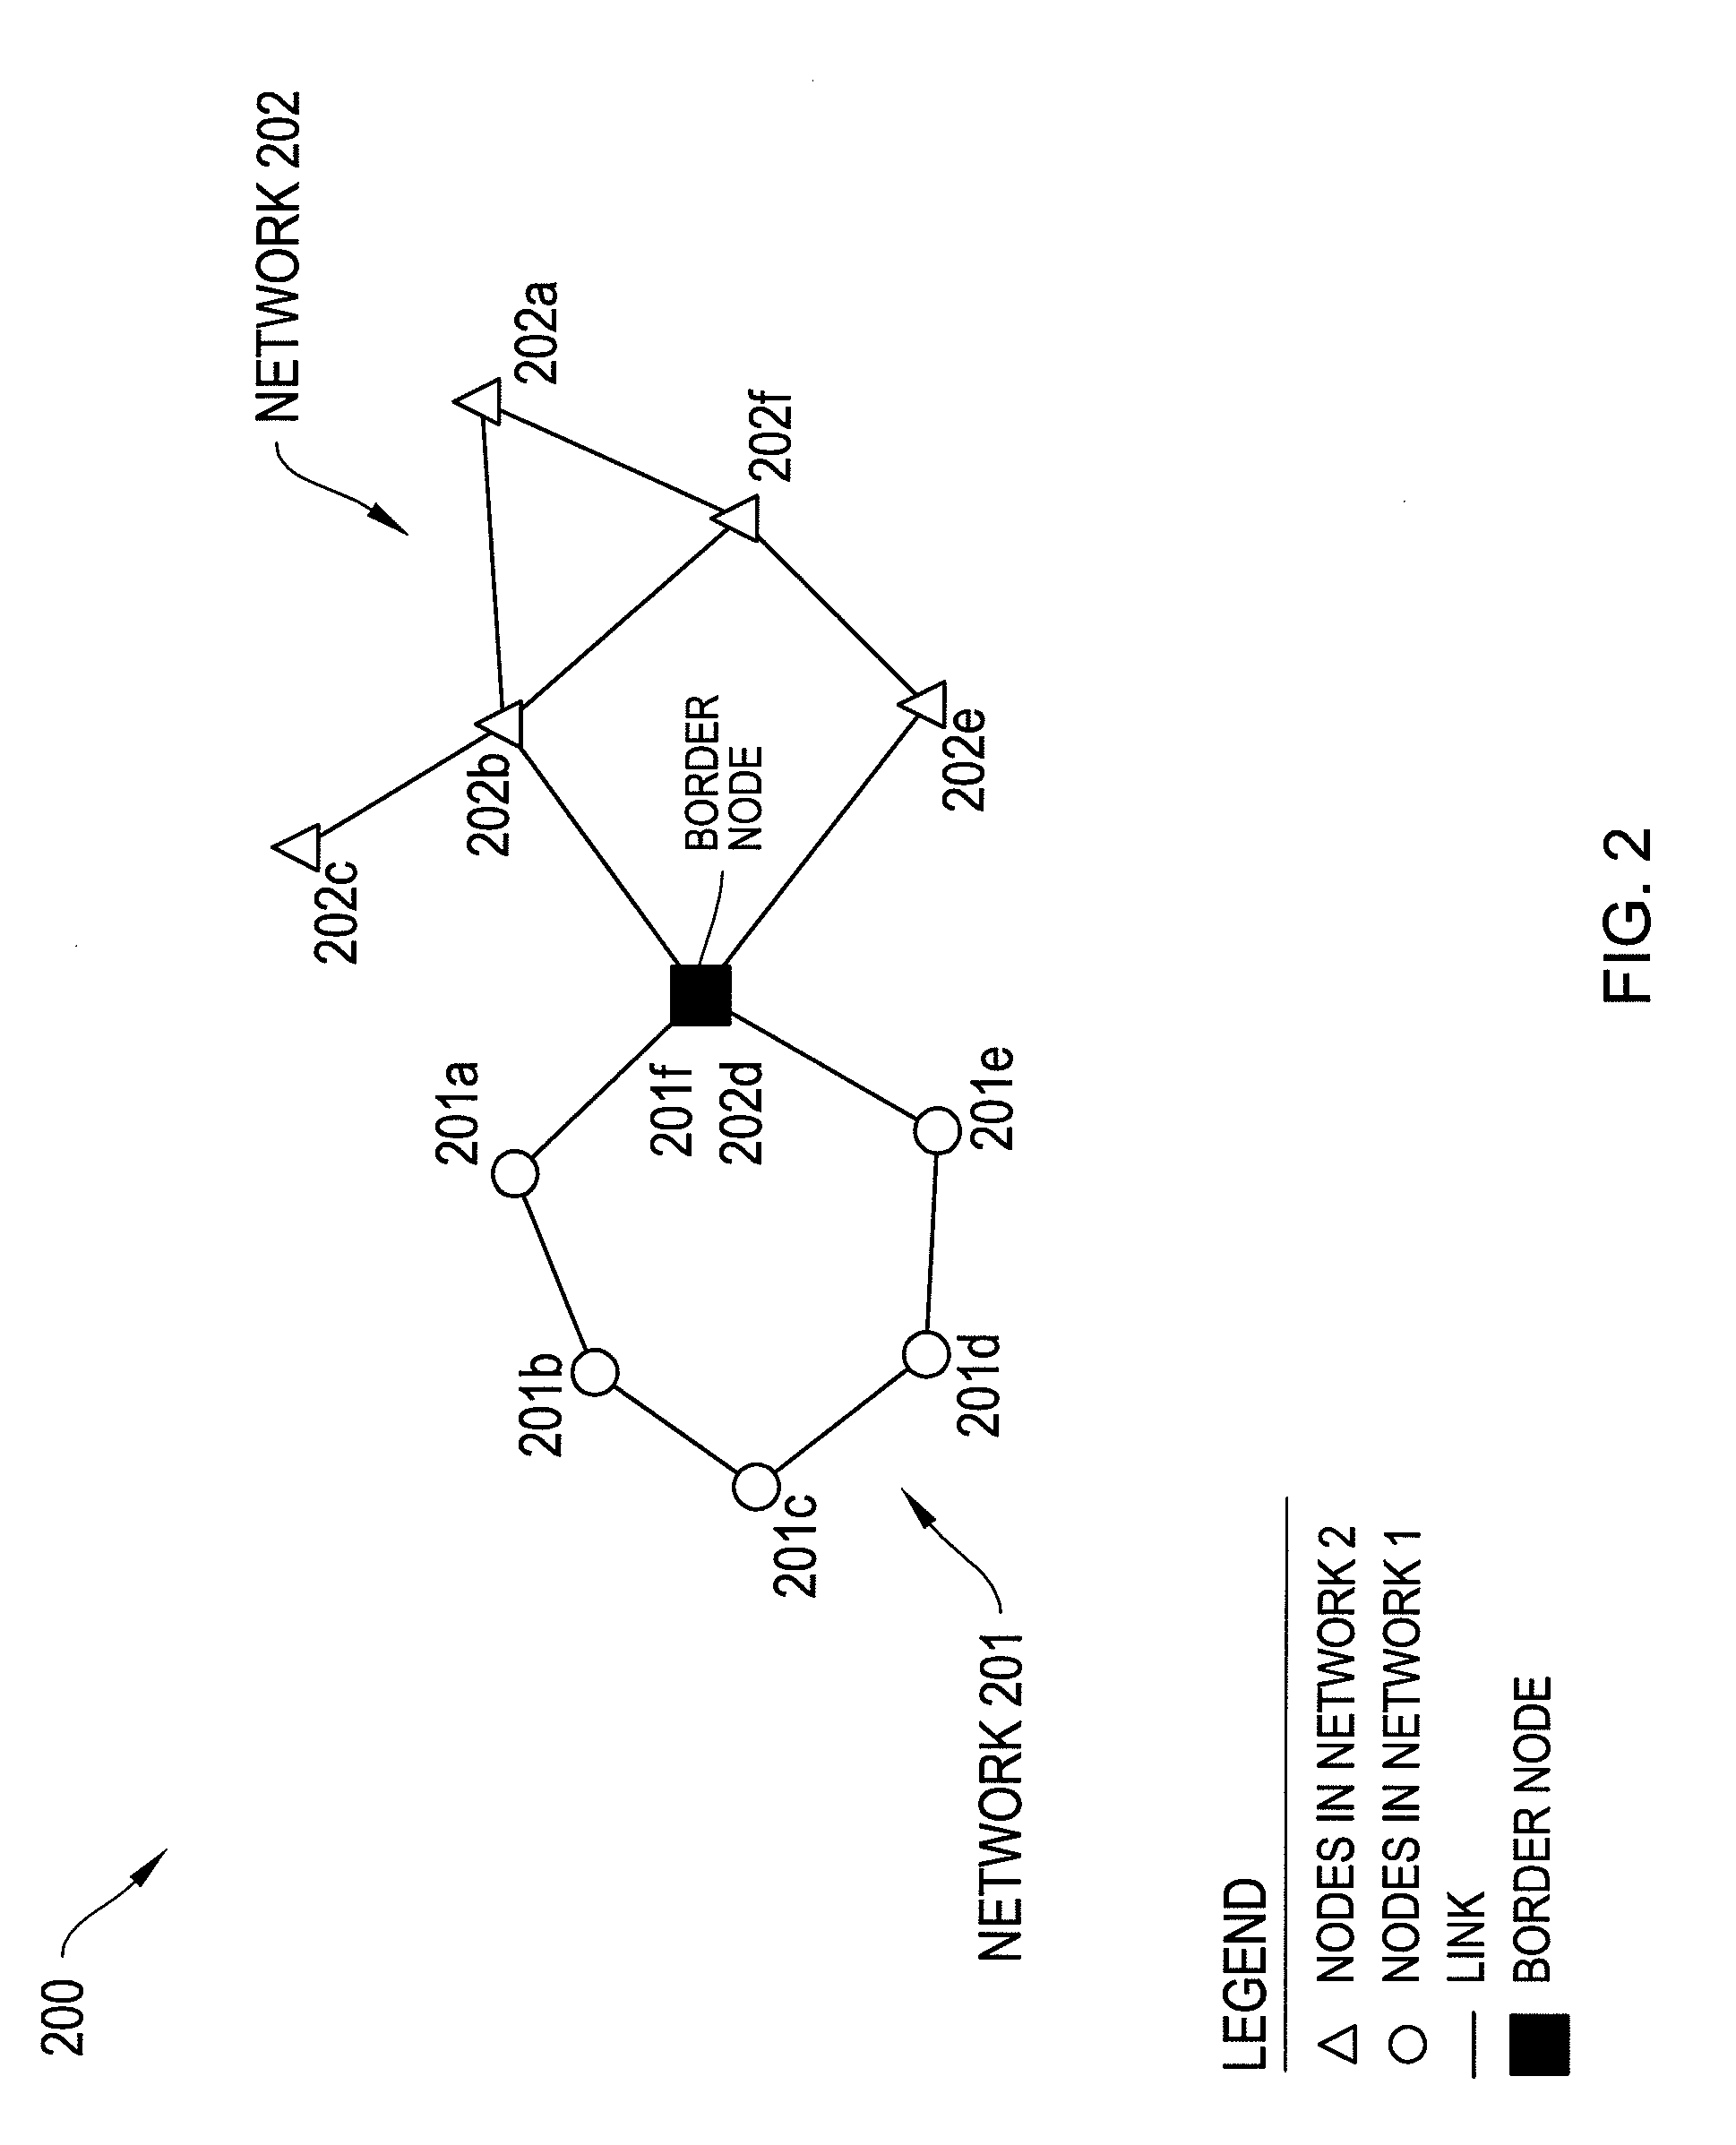 System, device, and method for unifying differently-routed networks using virtual topology representations